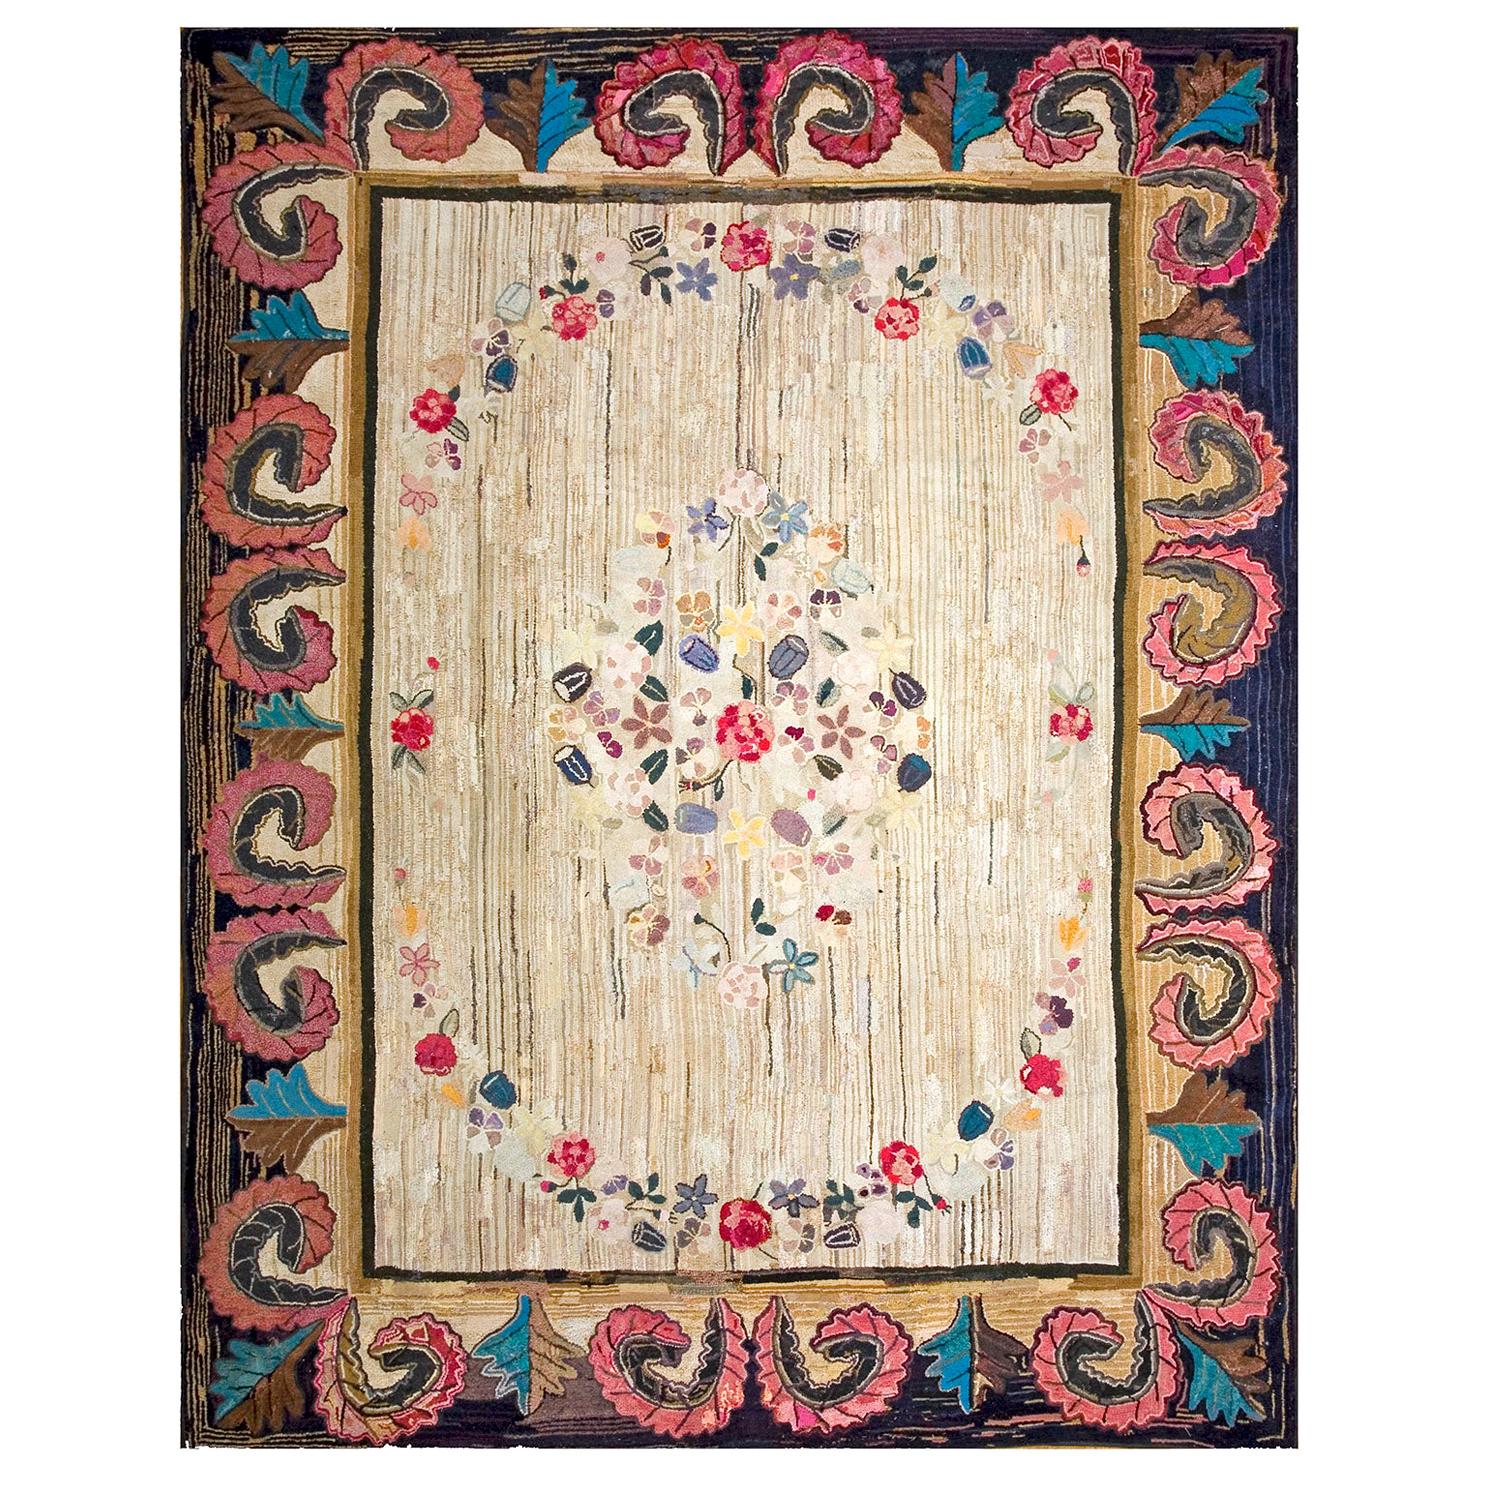 Antique American Hooked Rug 9' 0" x 11' 8"